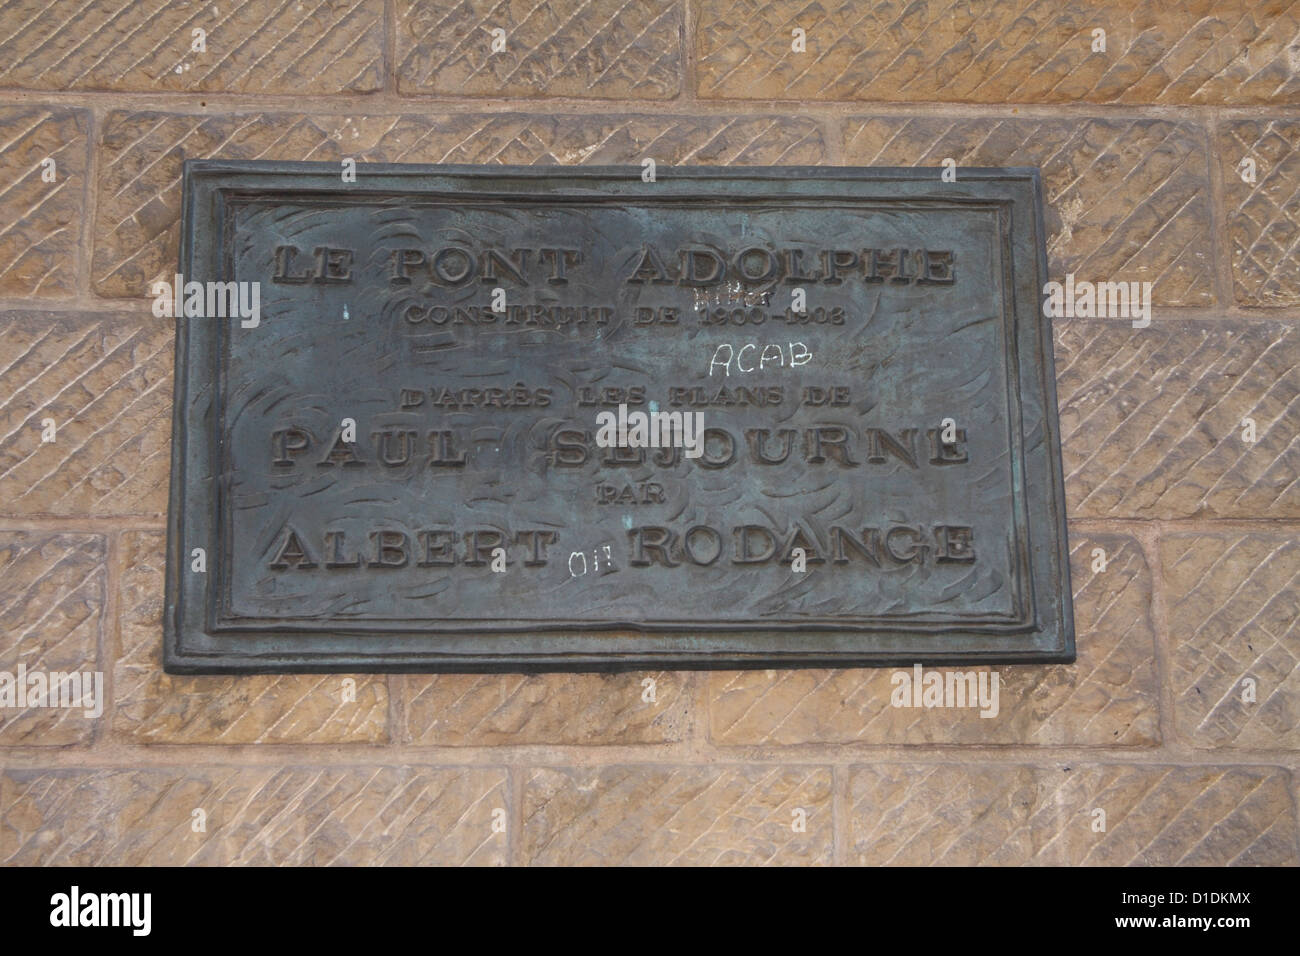 Plaque marking the construction of the Pont Adolphe bridge, Luxembourg City Stock Photo